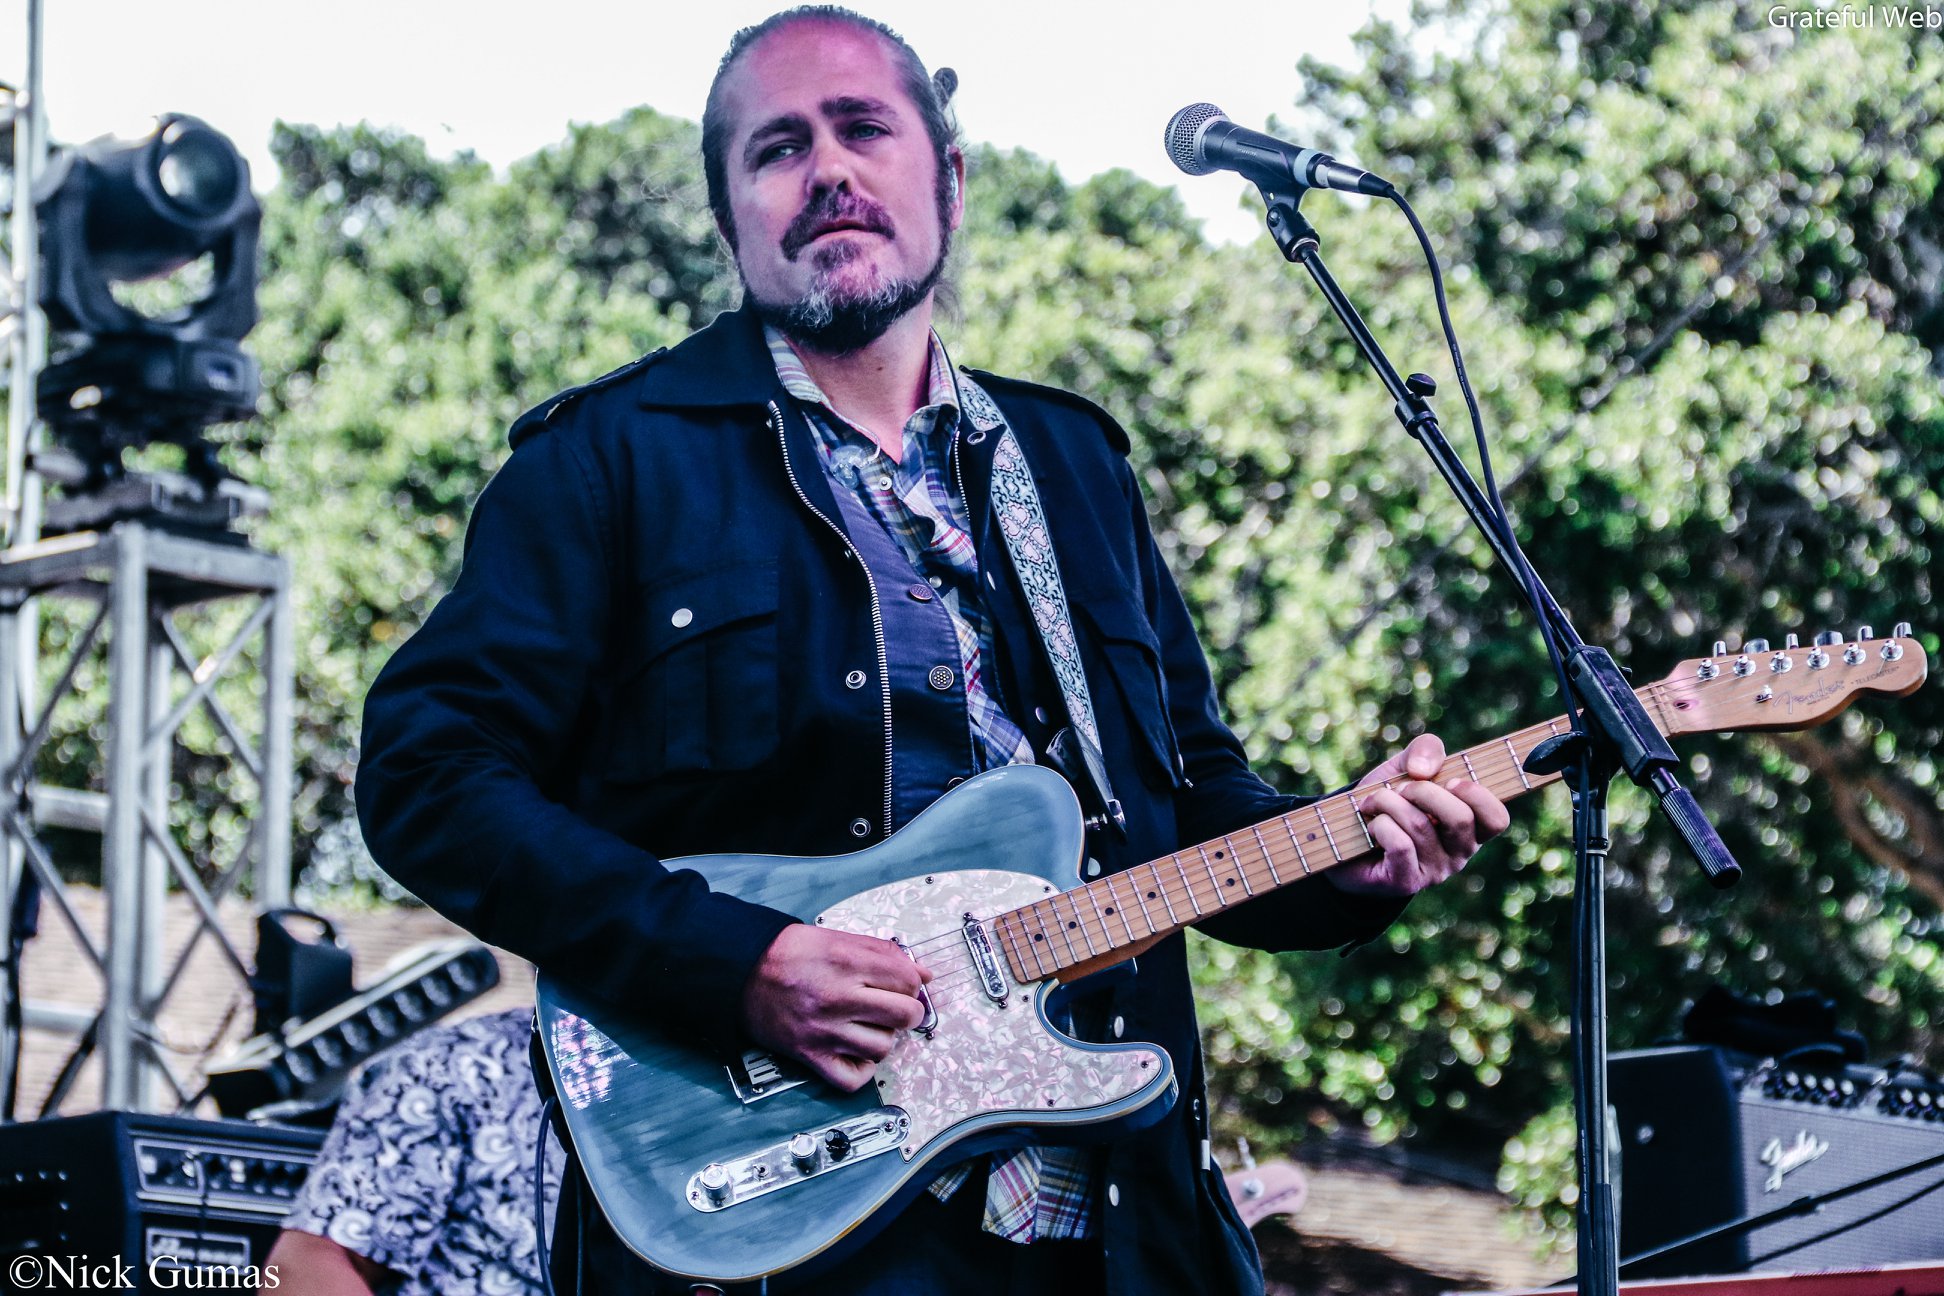 Singer-Songwriter ‘Citizen Cope’ Helps Wellmont Close Out 2019 in Dec. 28 Performance